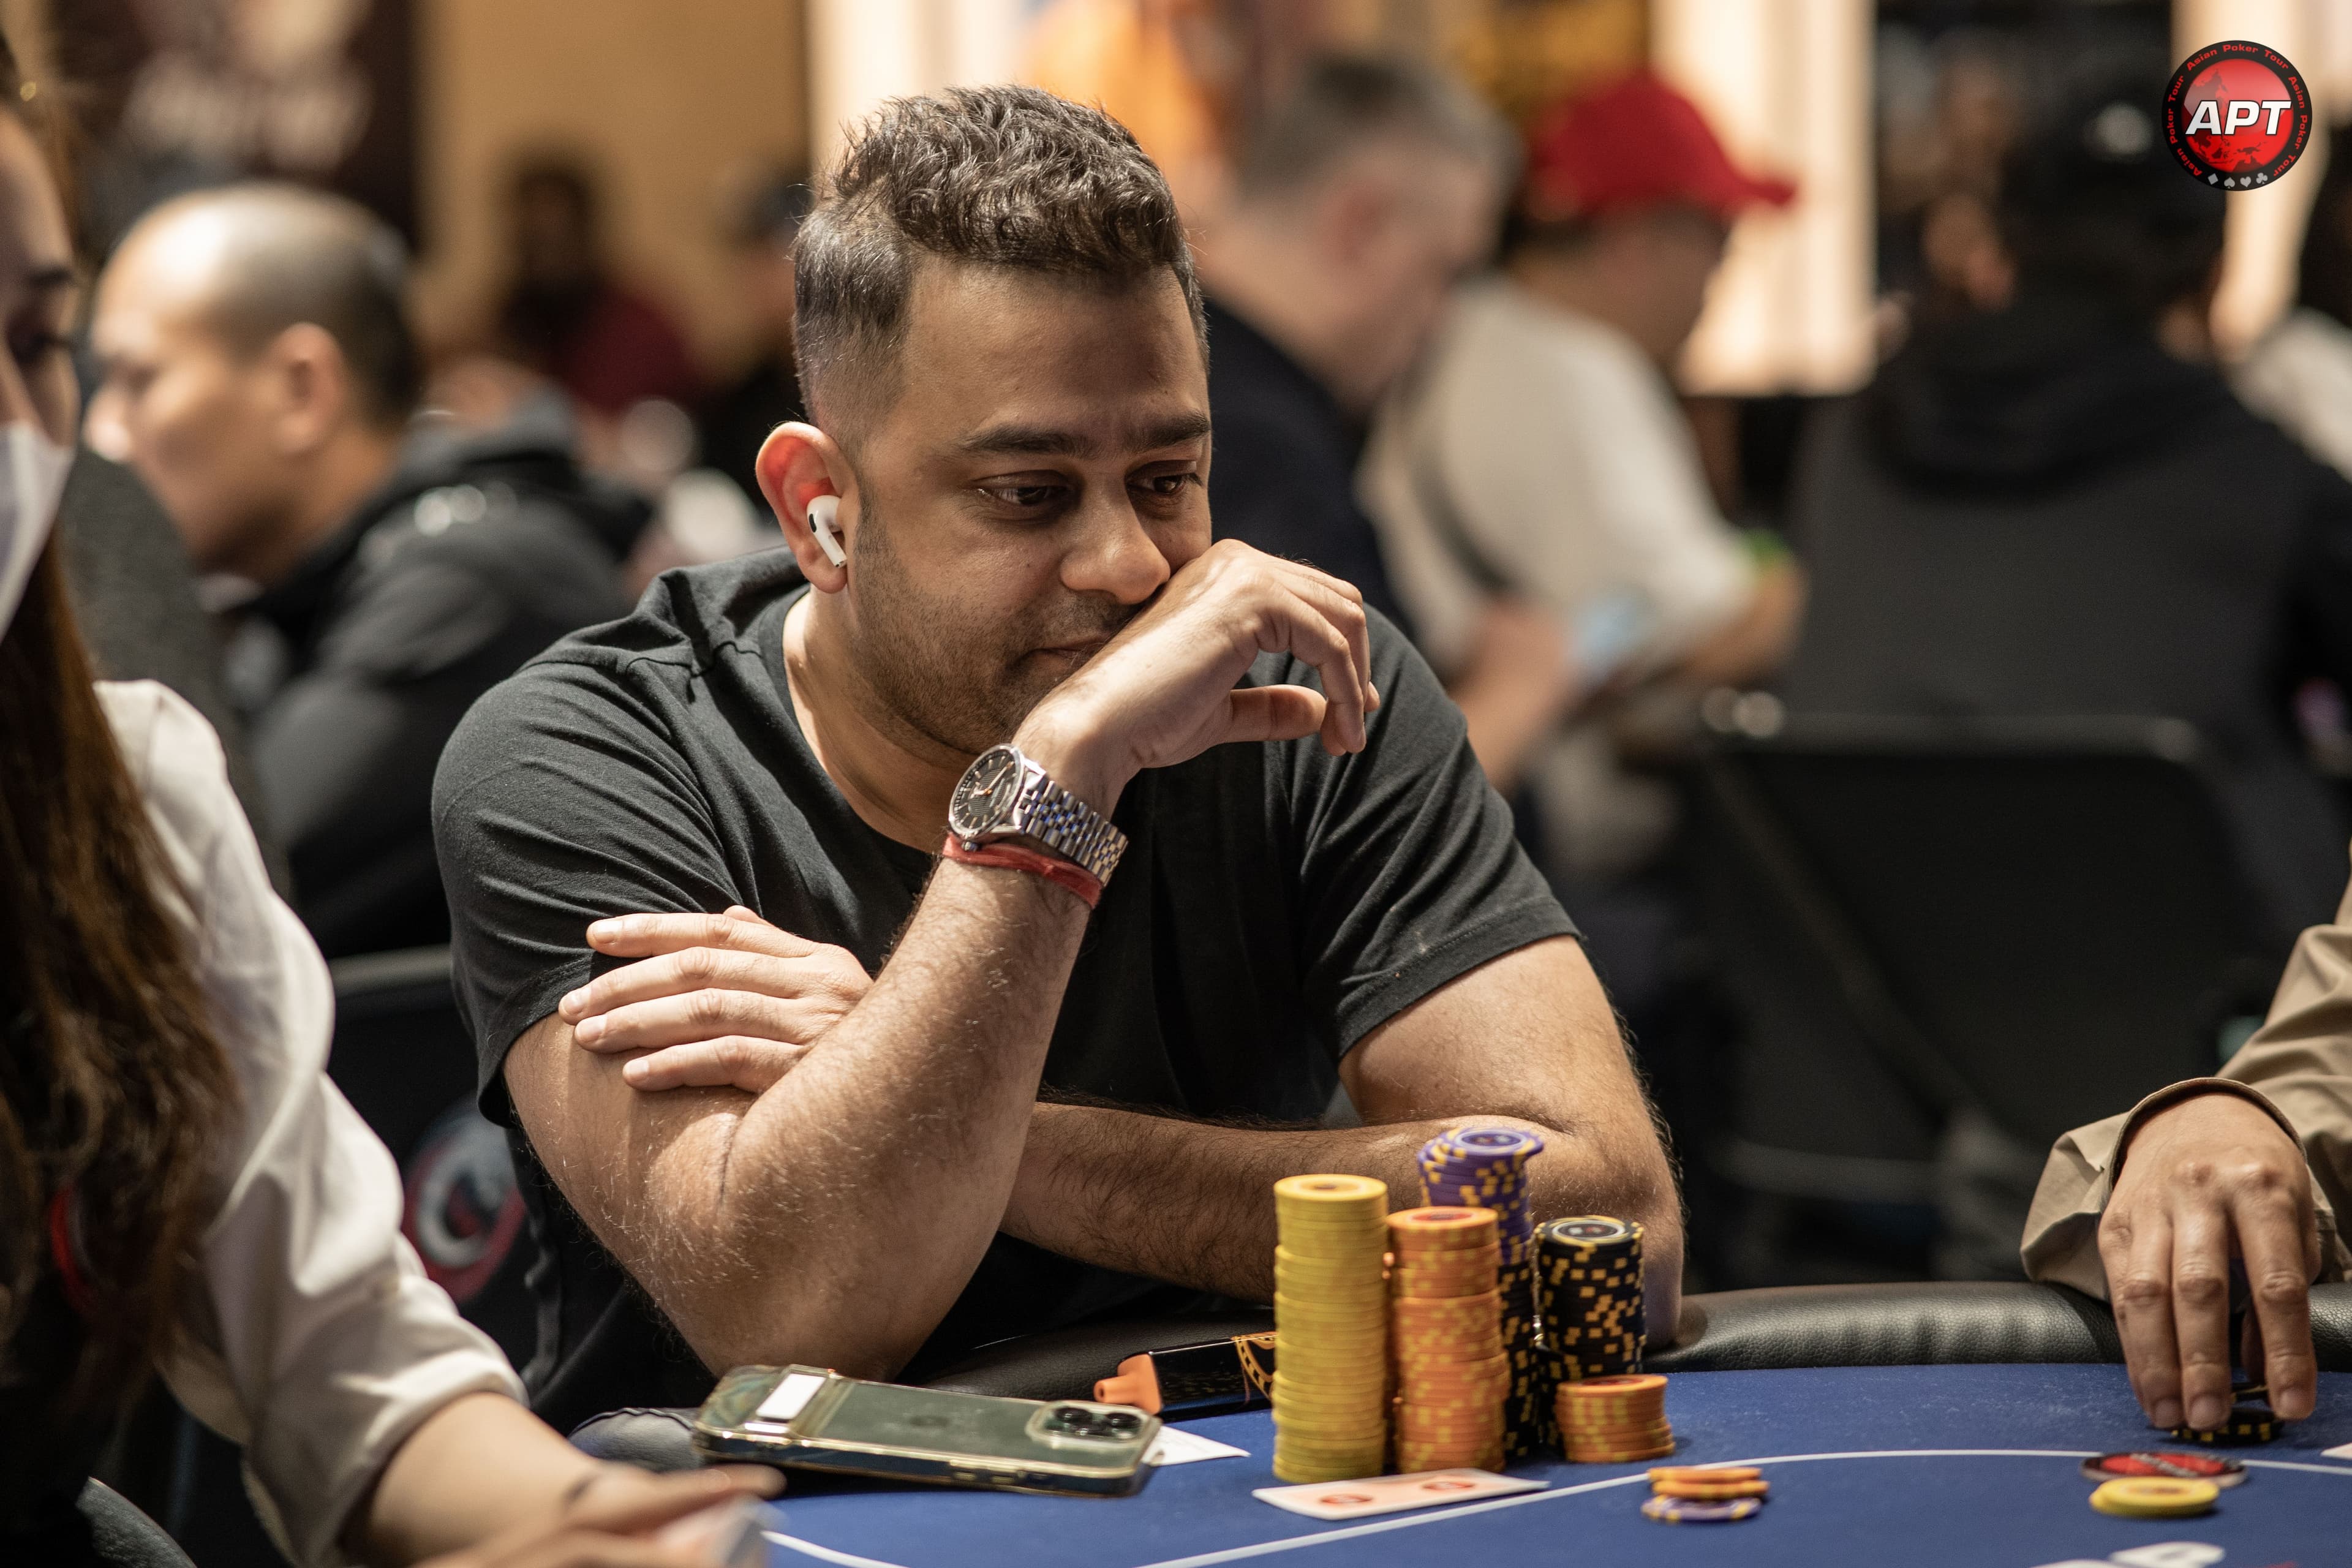 Main Event Day 1B Draws 175 Entries; India's Phashant Bhutoria Bags Biggest, Lester Edoc Wins 16th APT Title In Single Day High Roller, Two Female APT Champions Crowned In One Day